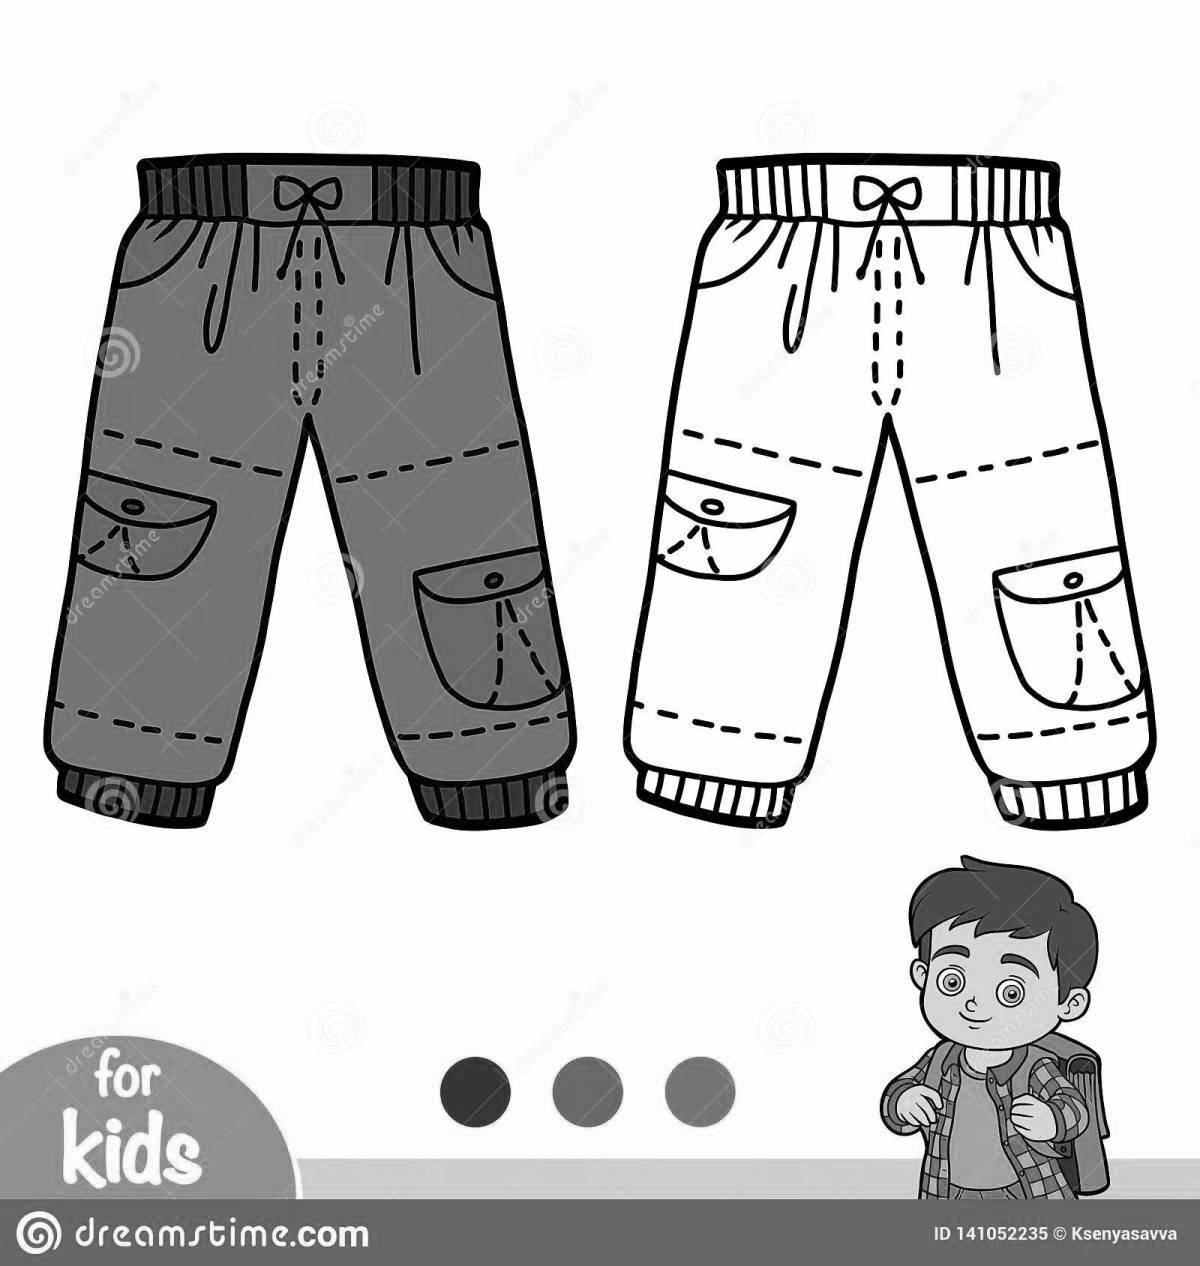 Colouring bright pants for children 3-4 years old